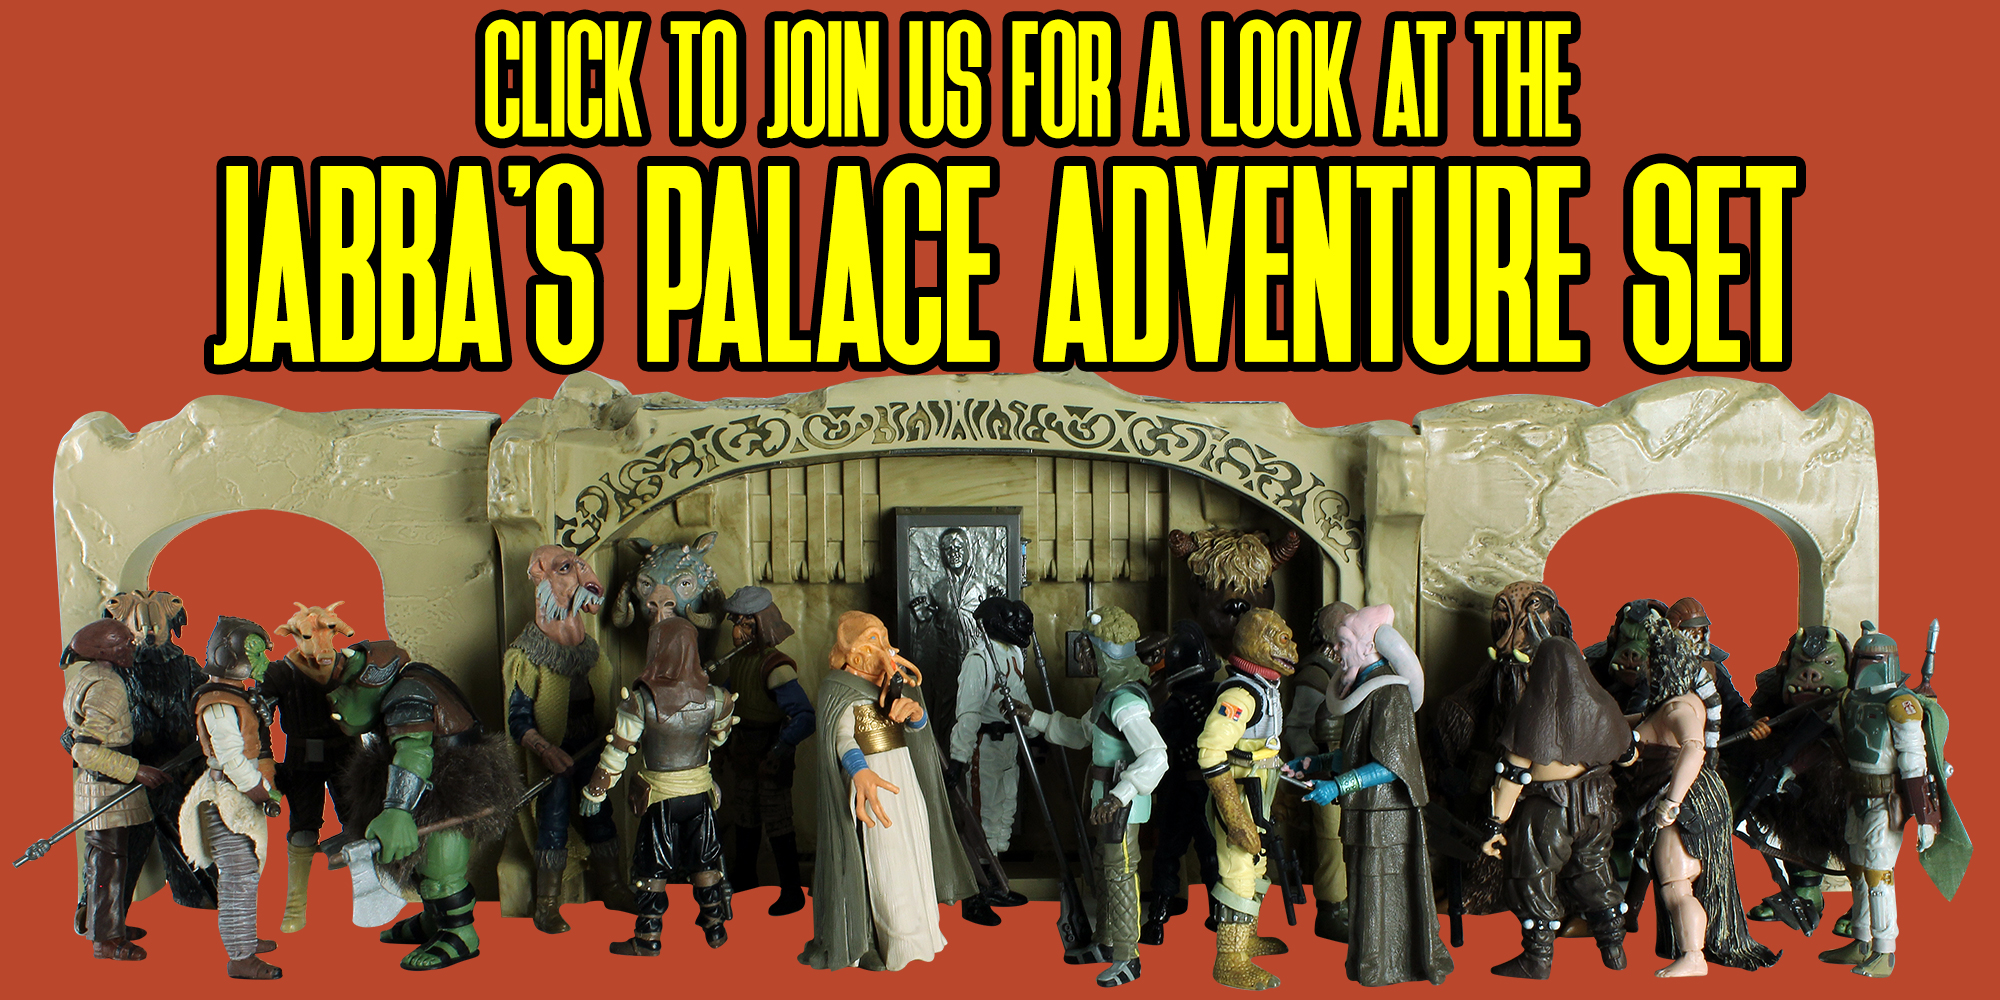 Join Us For A Look At The Jabba's Palace Adventure Set